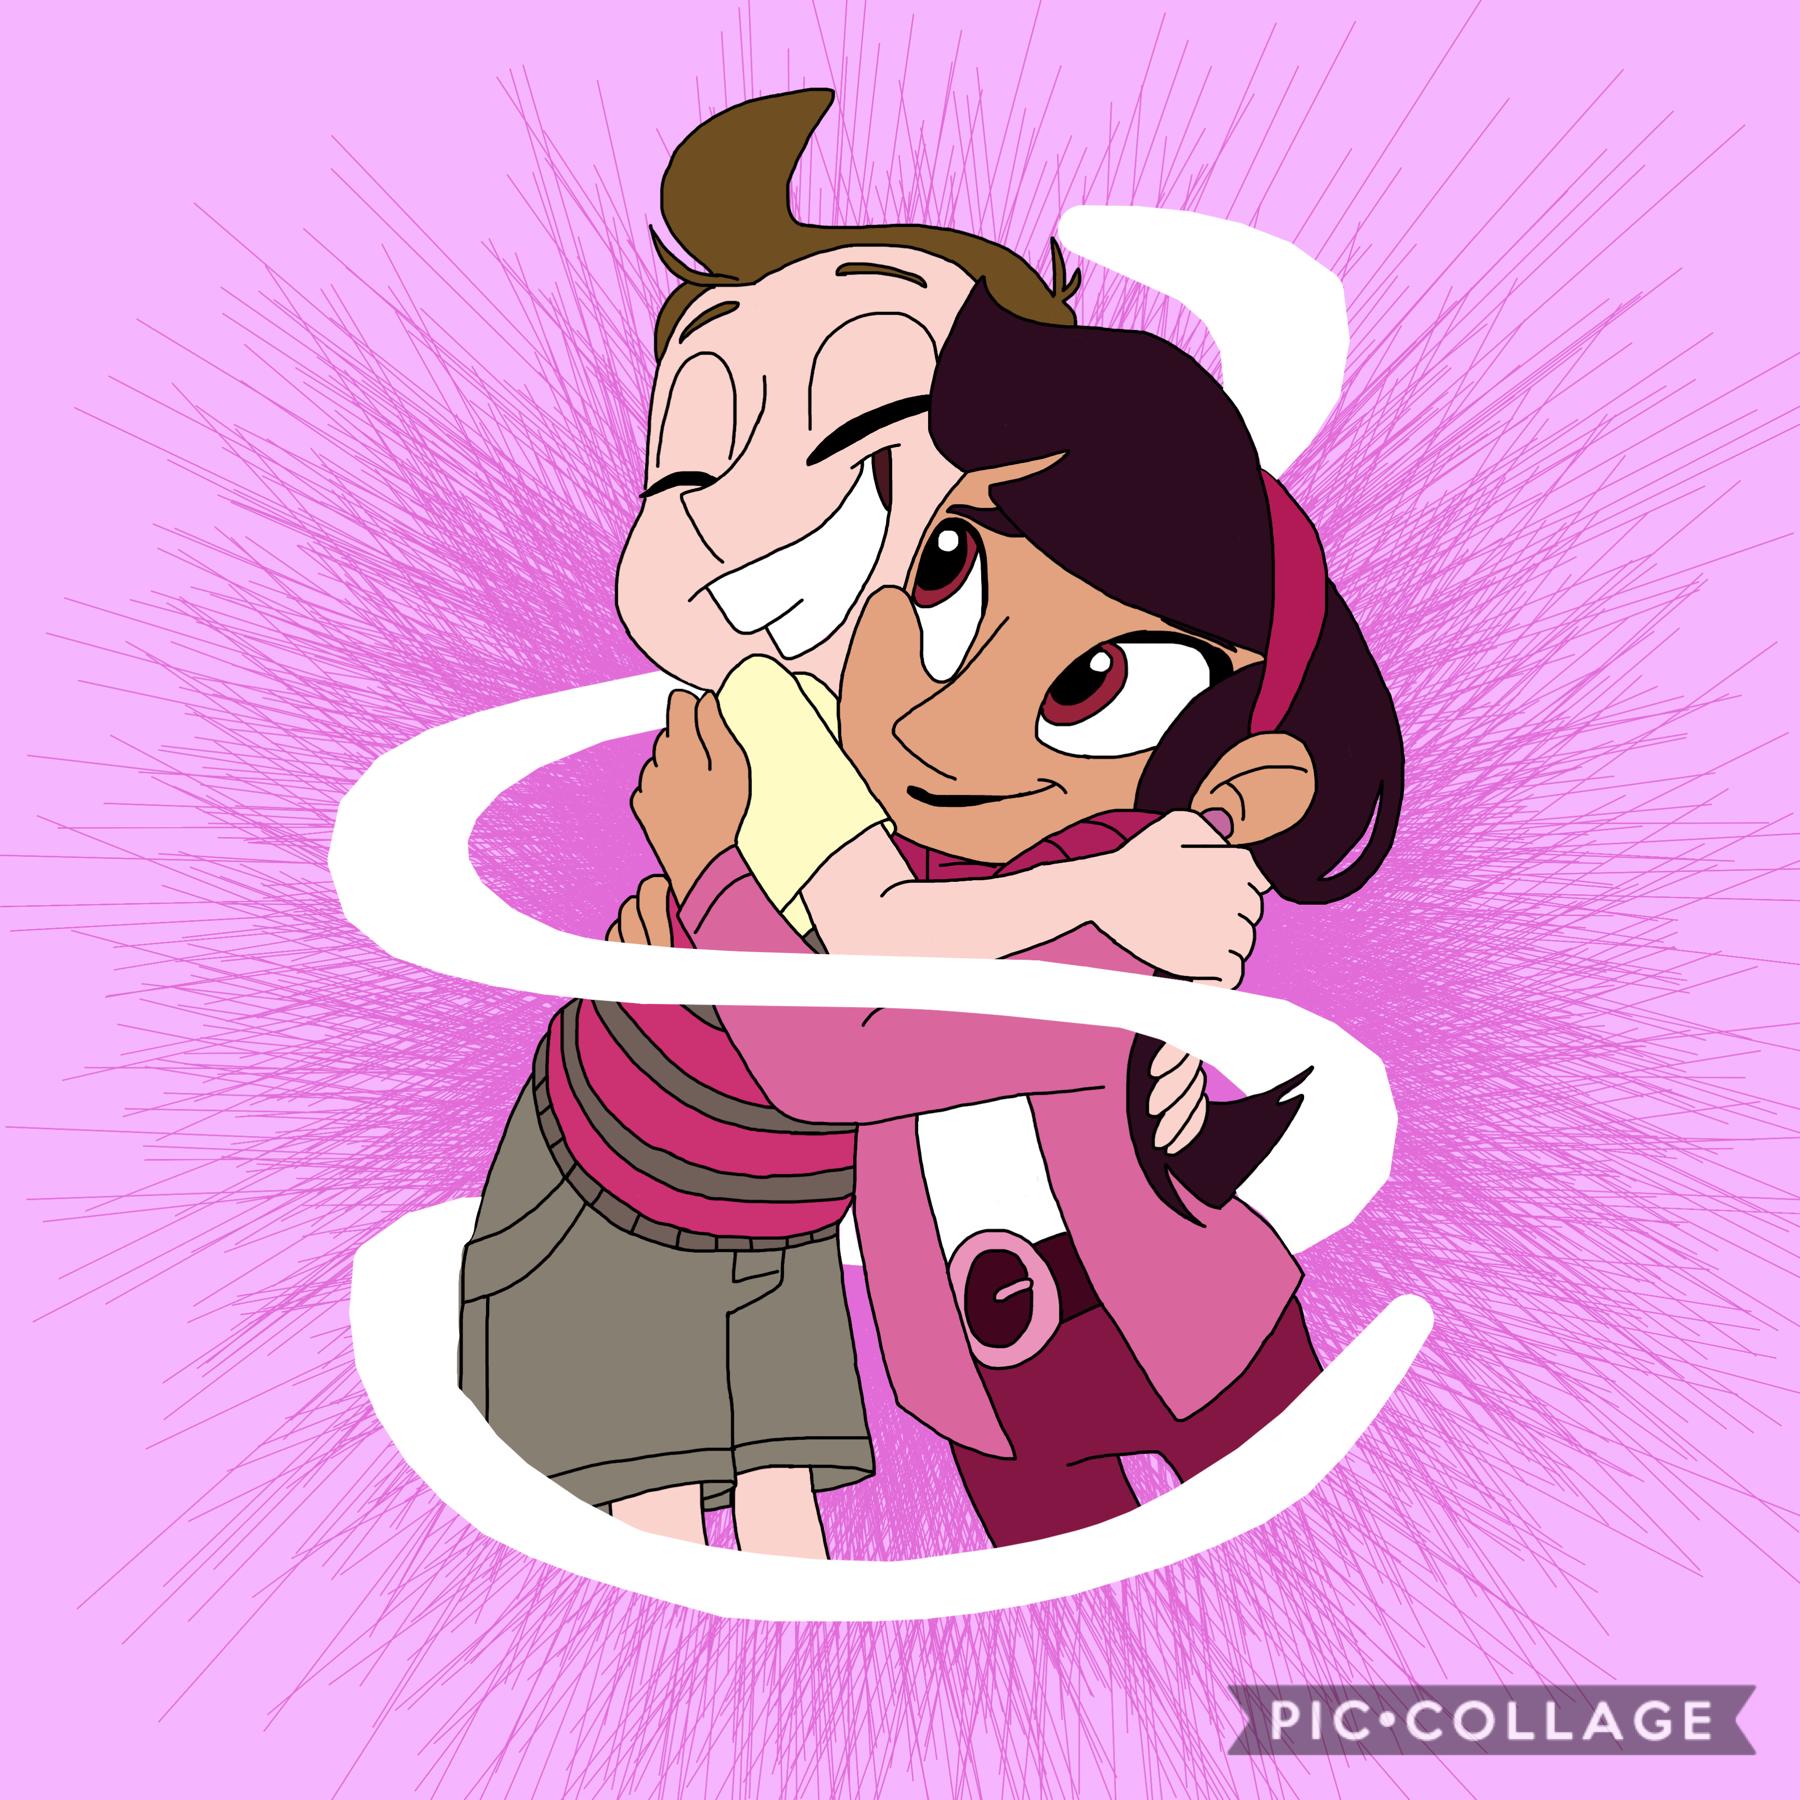 new OUTLINE edit (tap)

Info: Milo & Amanda from Milo Murphy’s Law


Check me out on PicsArt!

@dancingintheraine for complex edits

&

@raineyxday for outline and blend edits


—————————————————————————